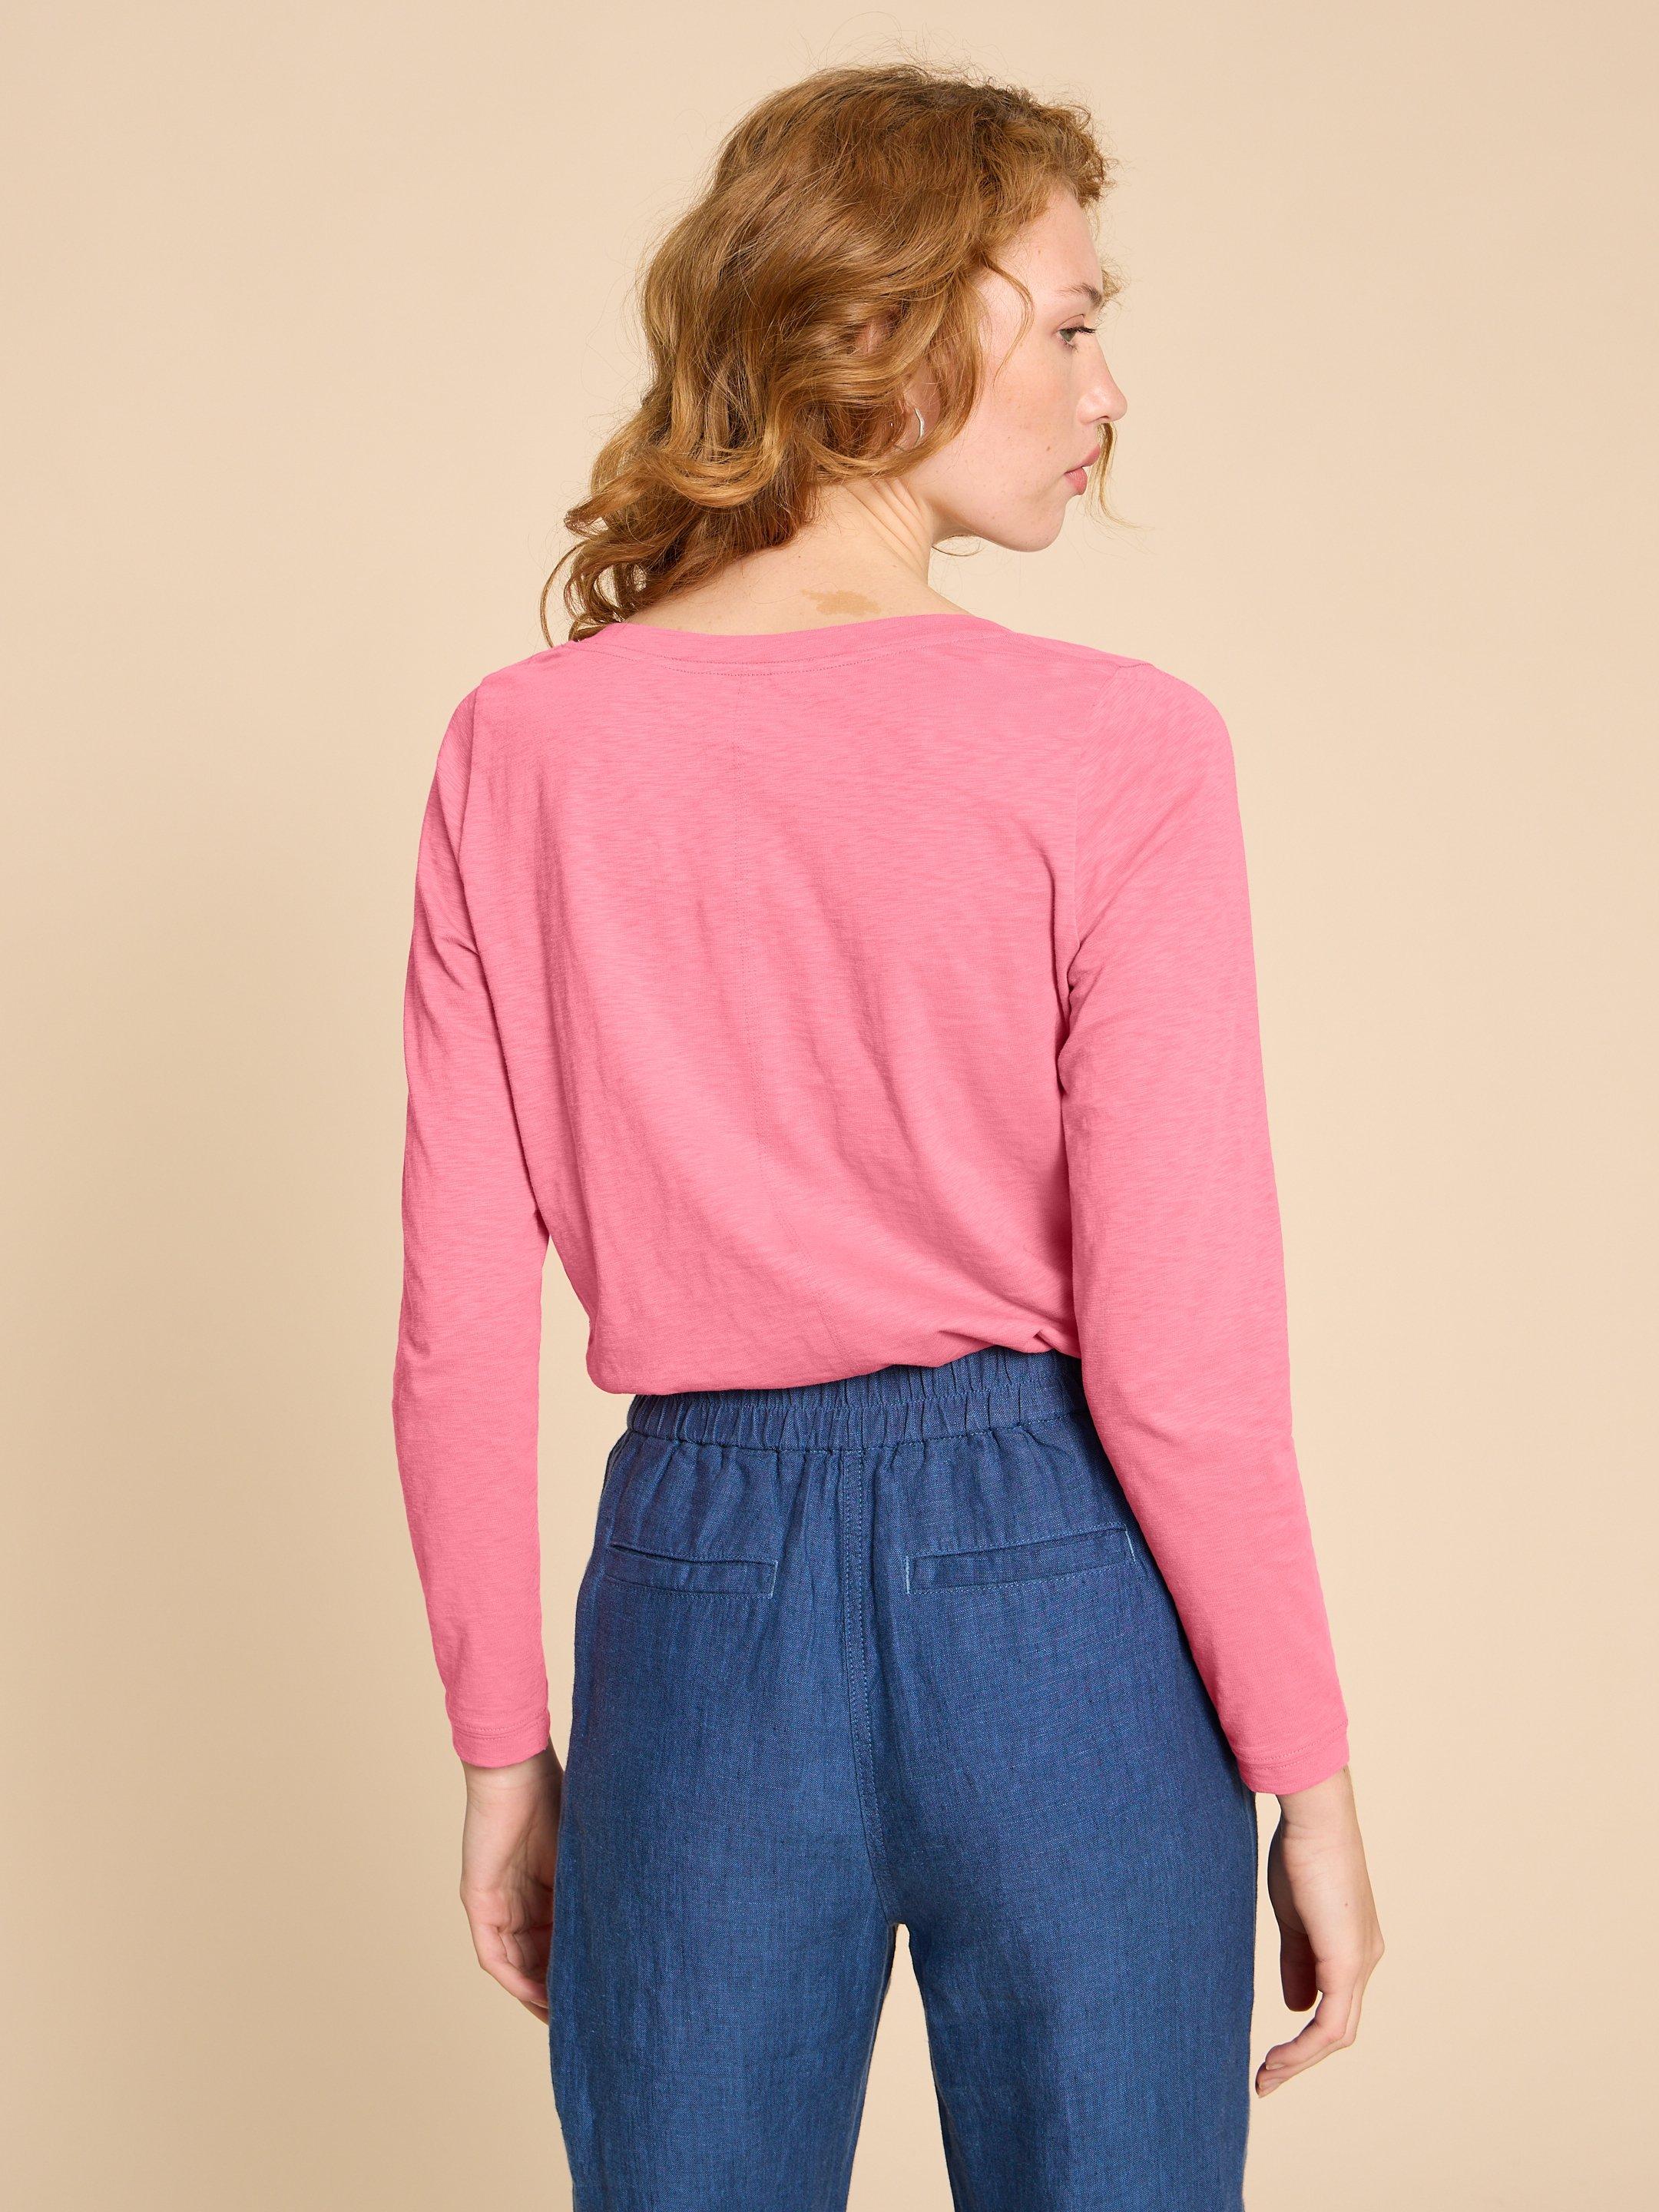 NELLY LS PRINTED TEE in MID PINK - MODEL BACK